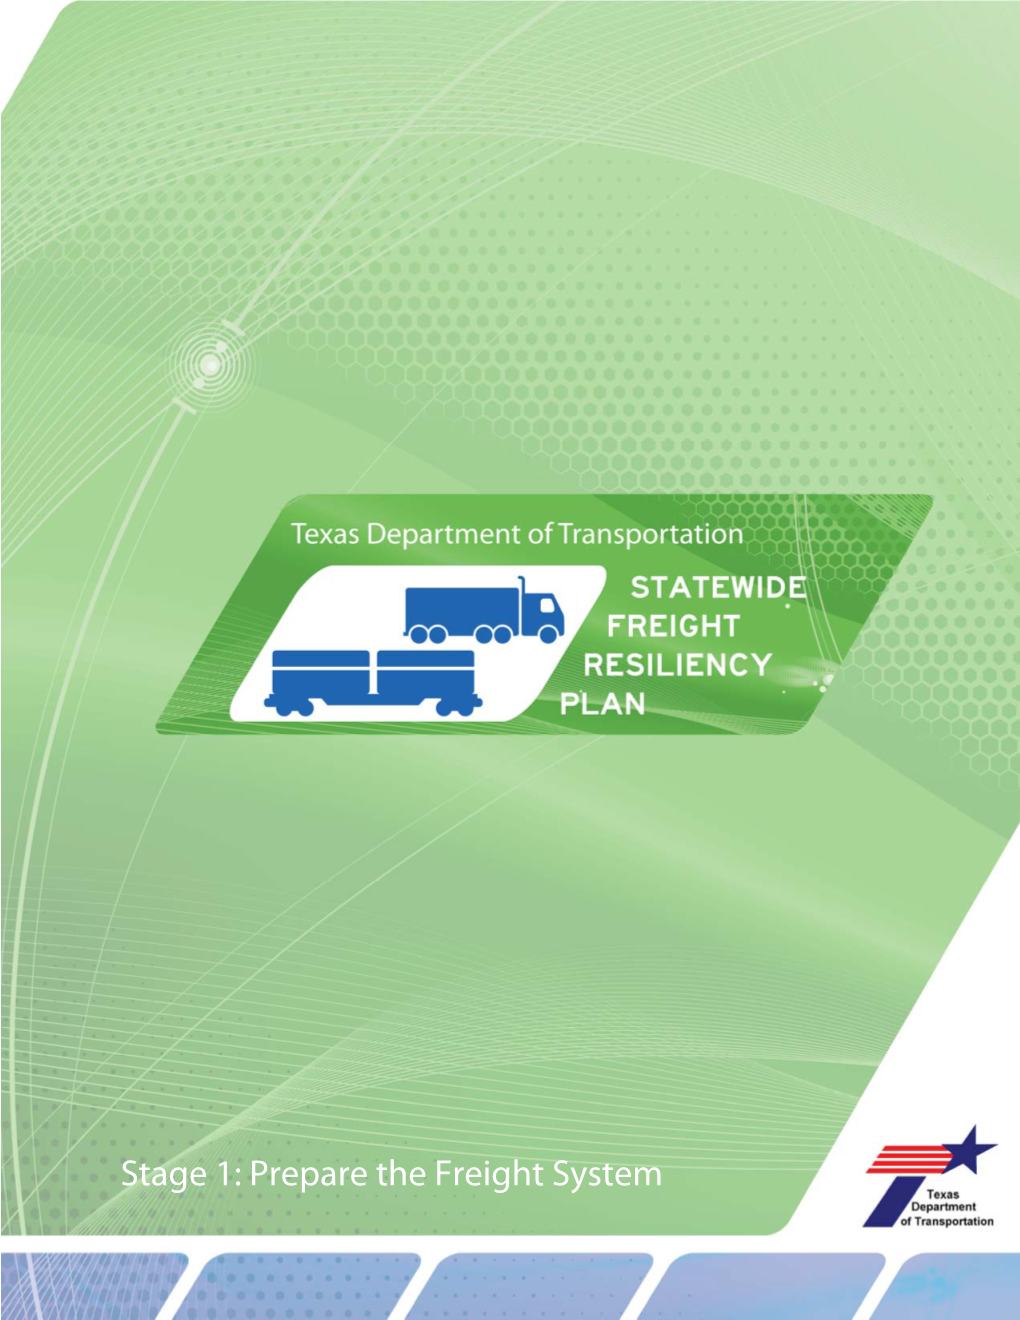 Statewide Freight Resiliency Plan Is to Assess the Resilience of the DEFINITIONS